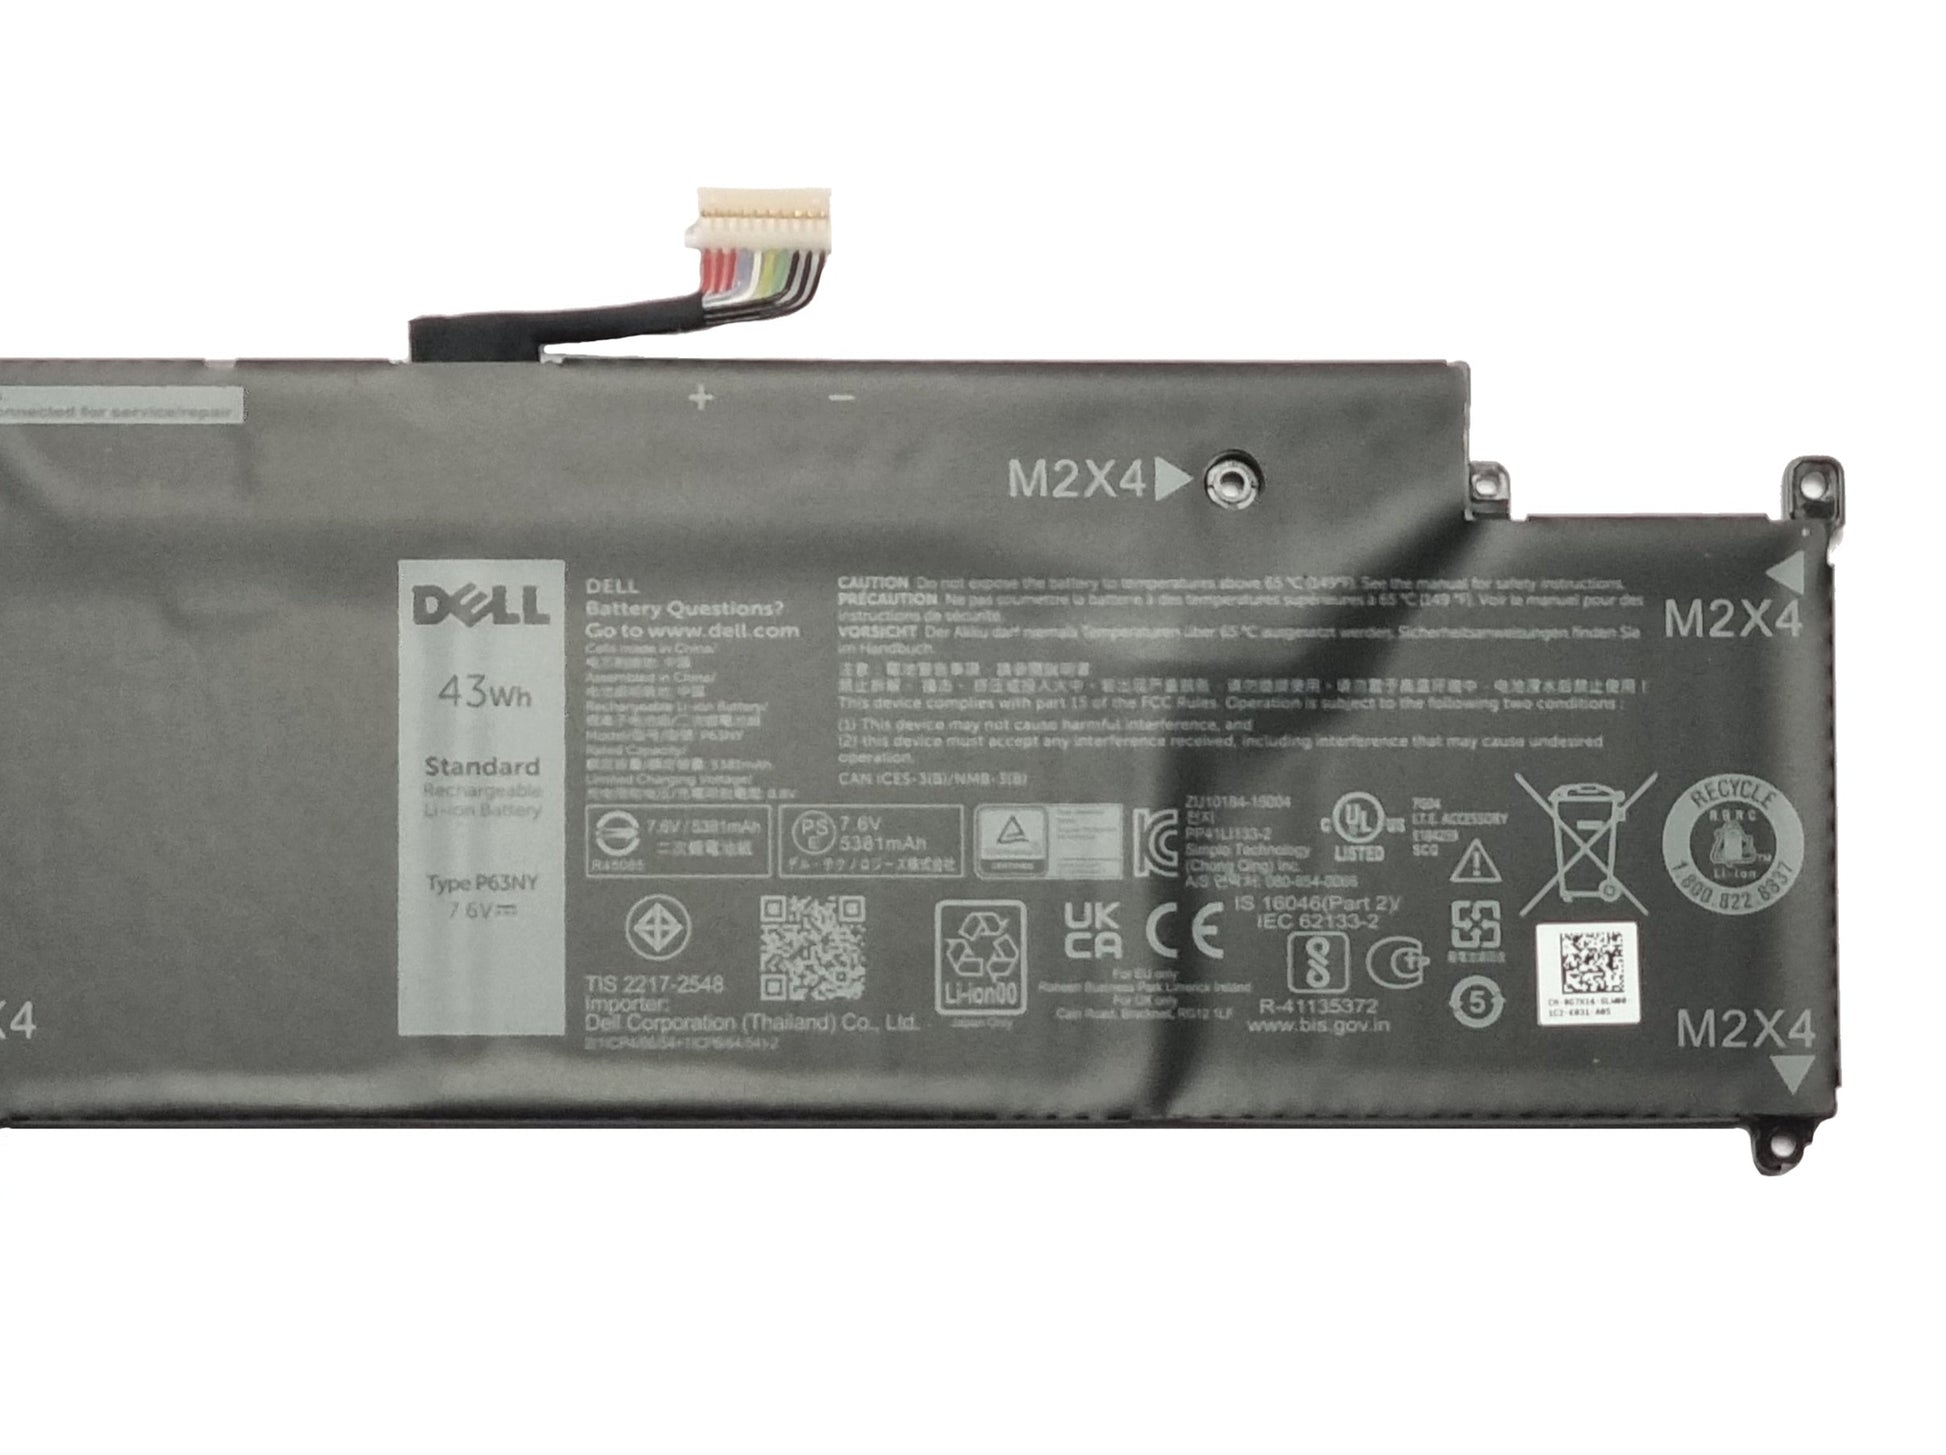 Genuine Dell Latitude 13 7370 43Wh 4 Cell Laptop Battery P63NY G7X14 0G7X14